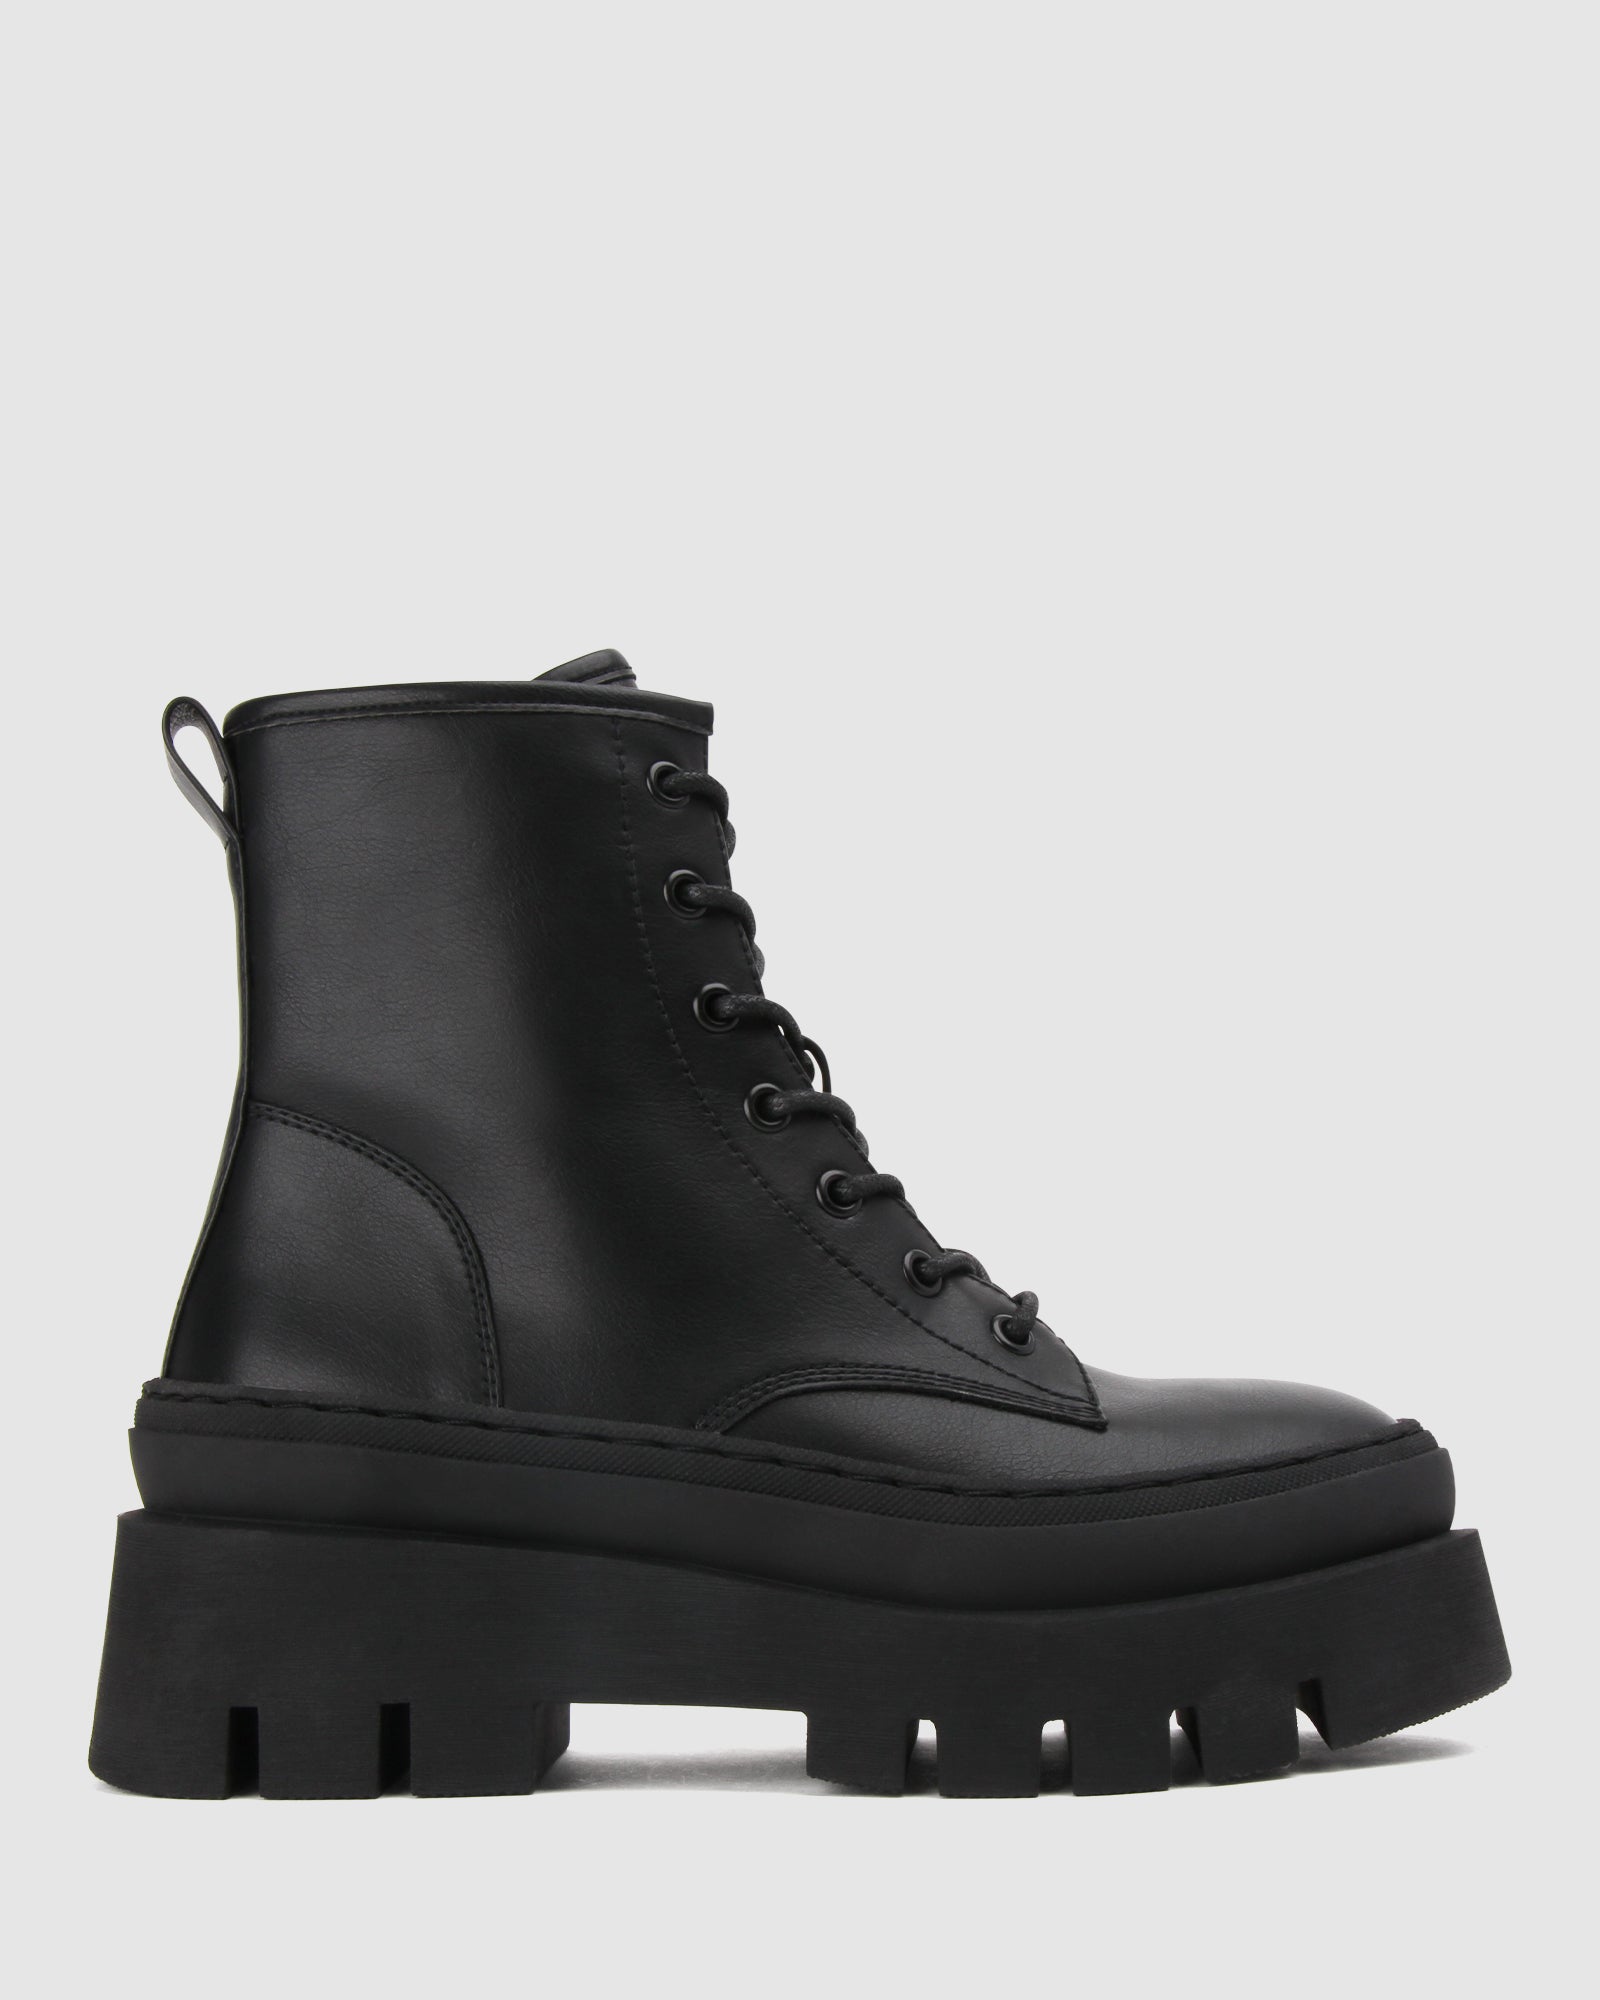 Buy TRAP Chunky Combat Boots by Betts online - Betts